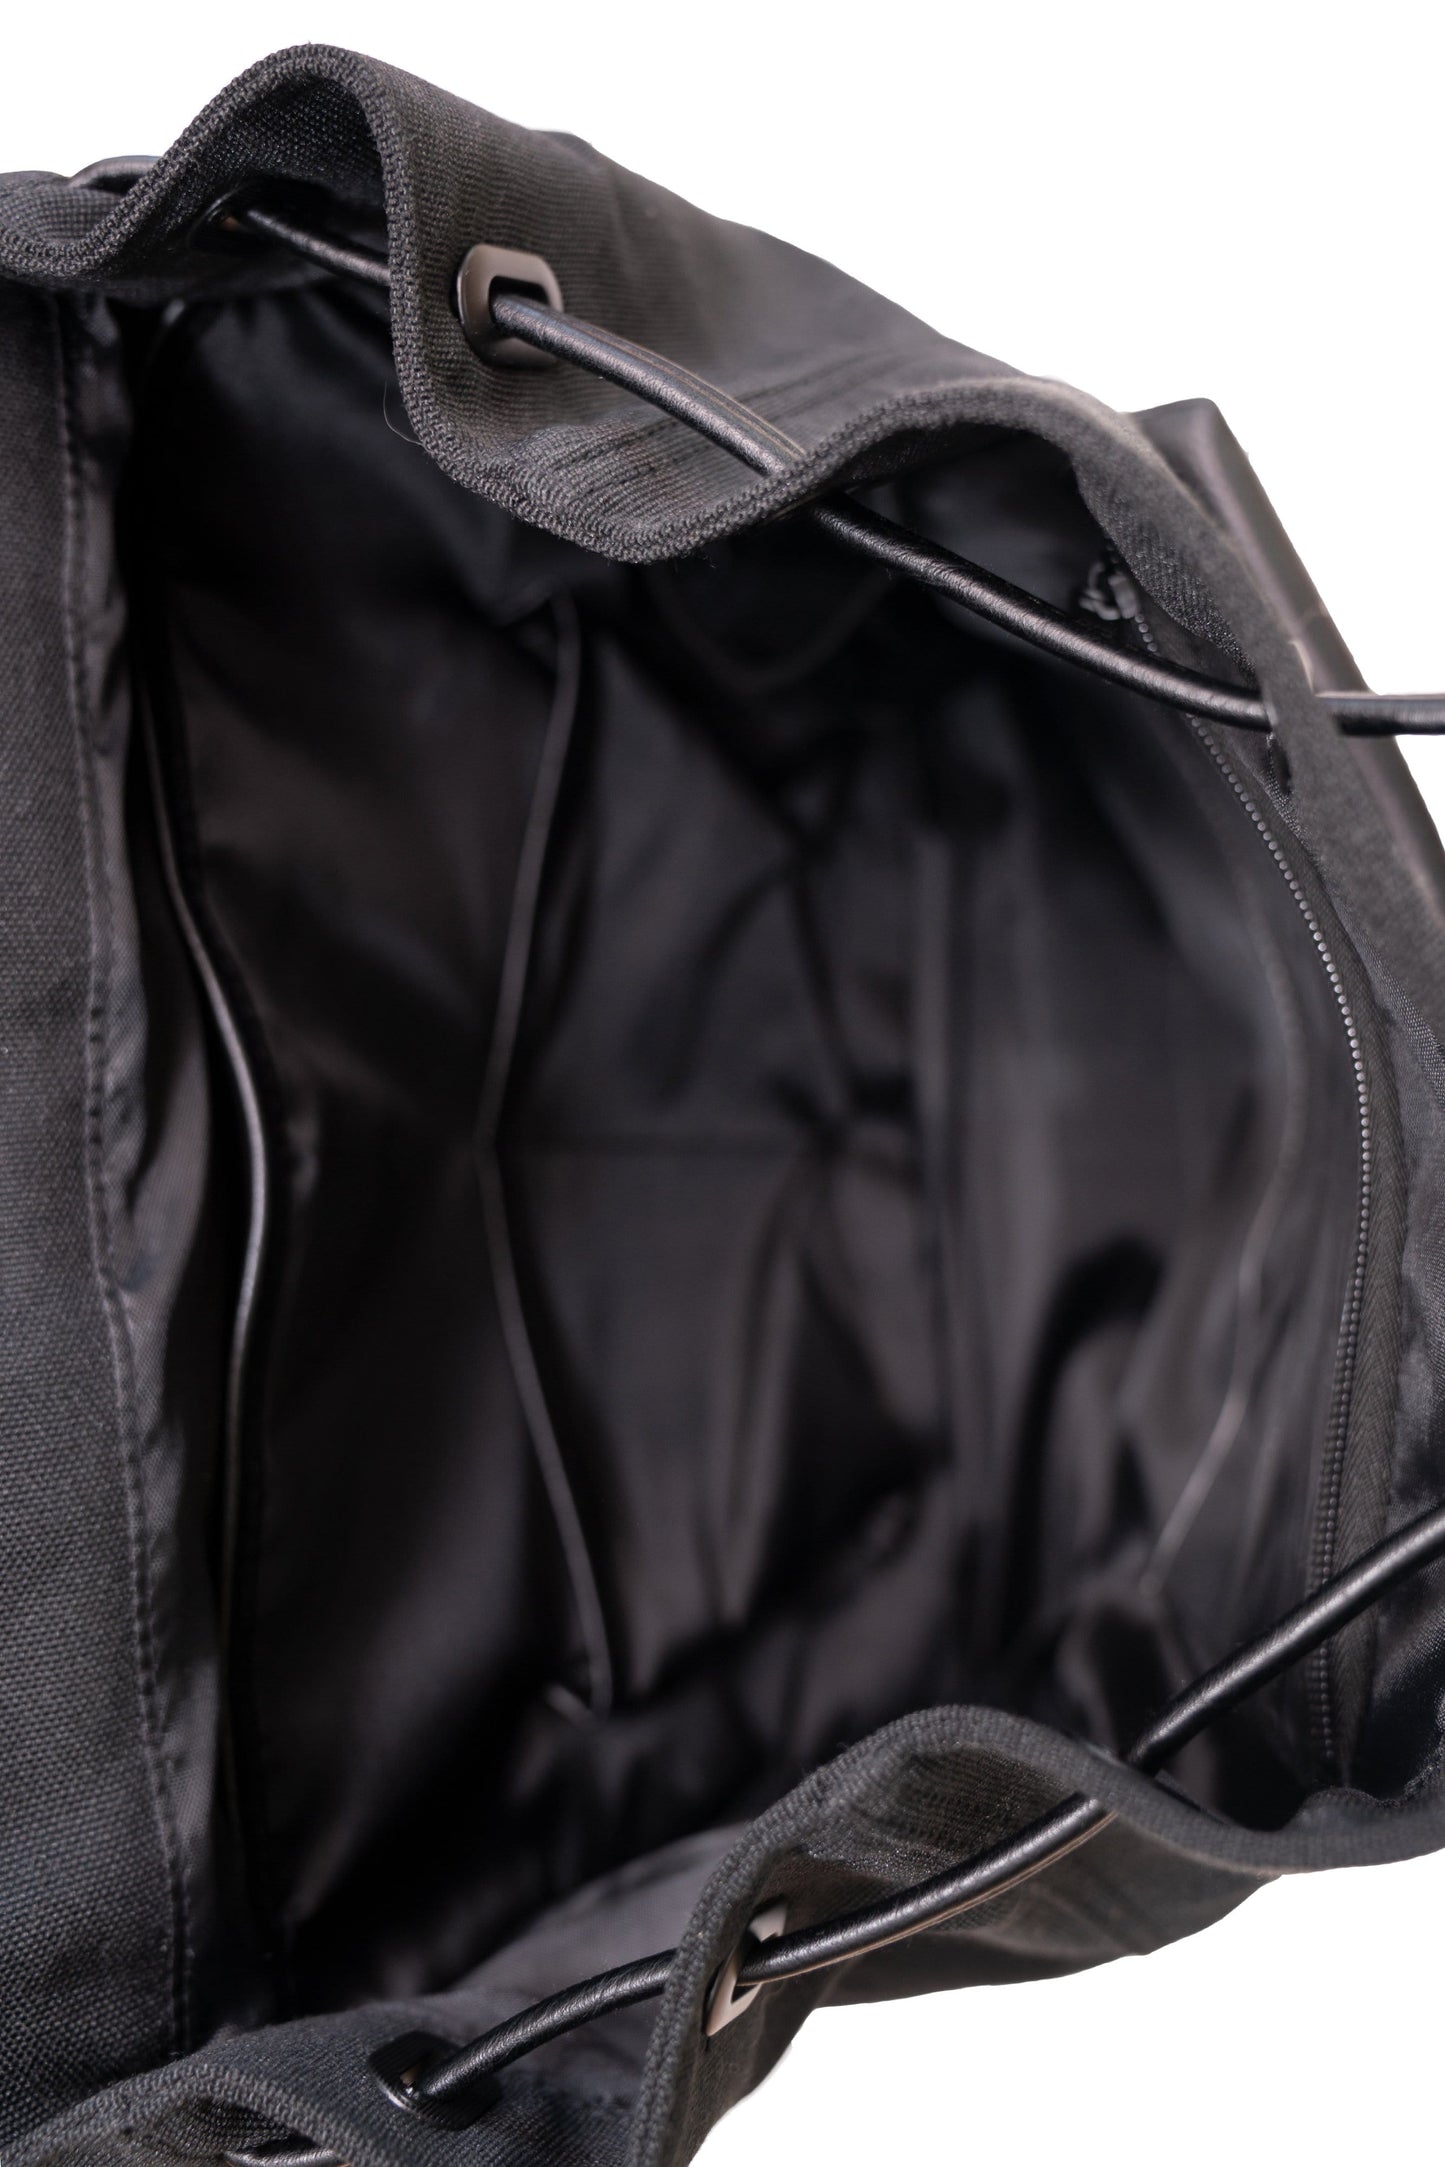 Rucksack Black Open Top with Inside Pocket View